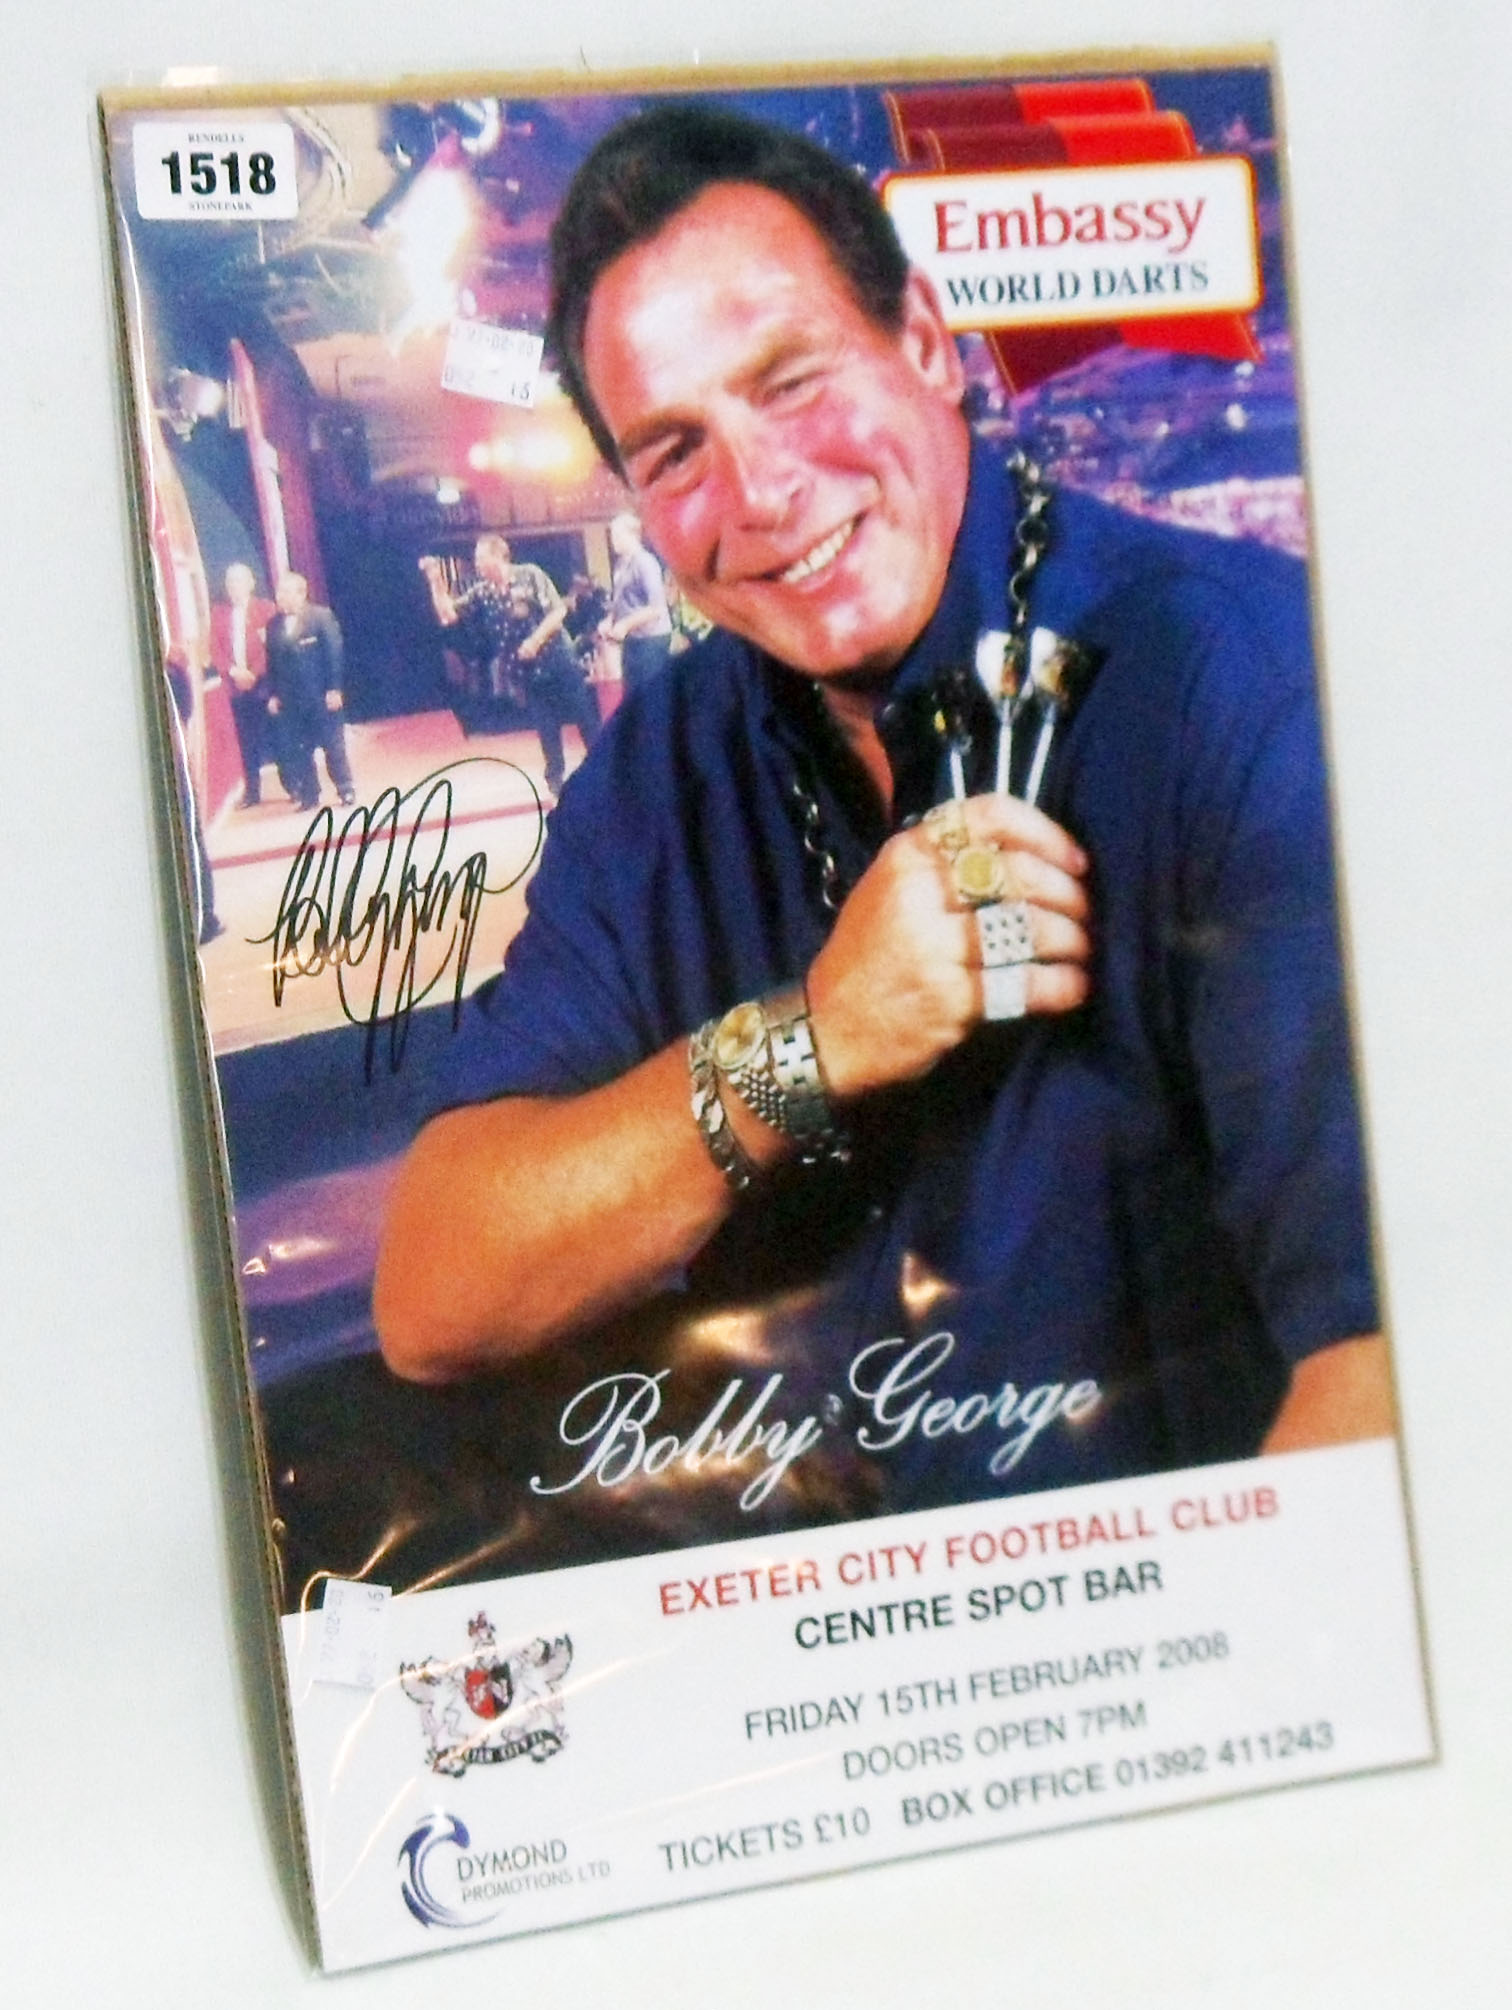 Bobby George: an unframed promotional photograph from 2008 Exeter City Football Club Centre Spot Bar